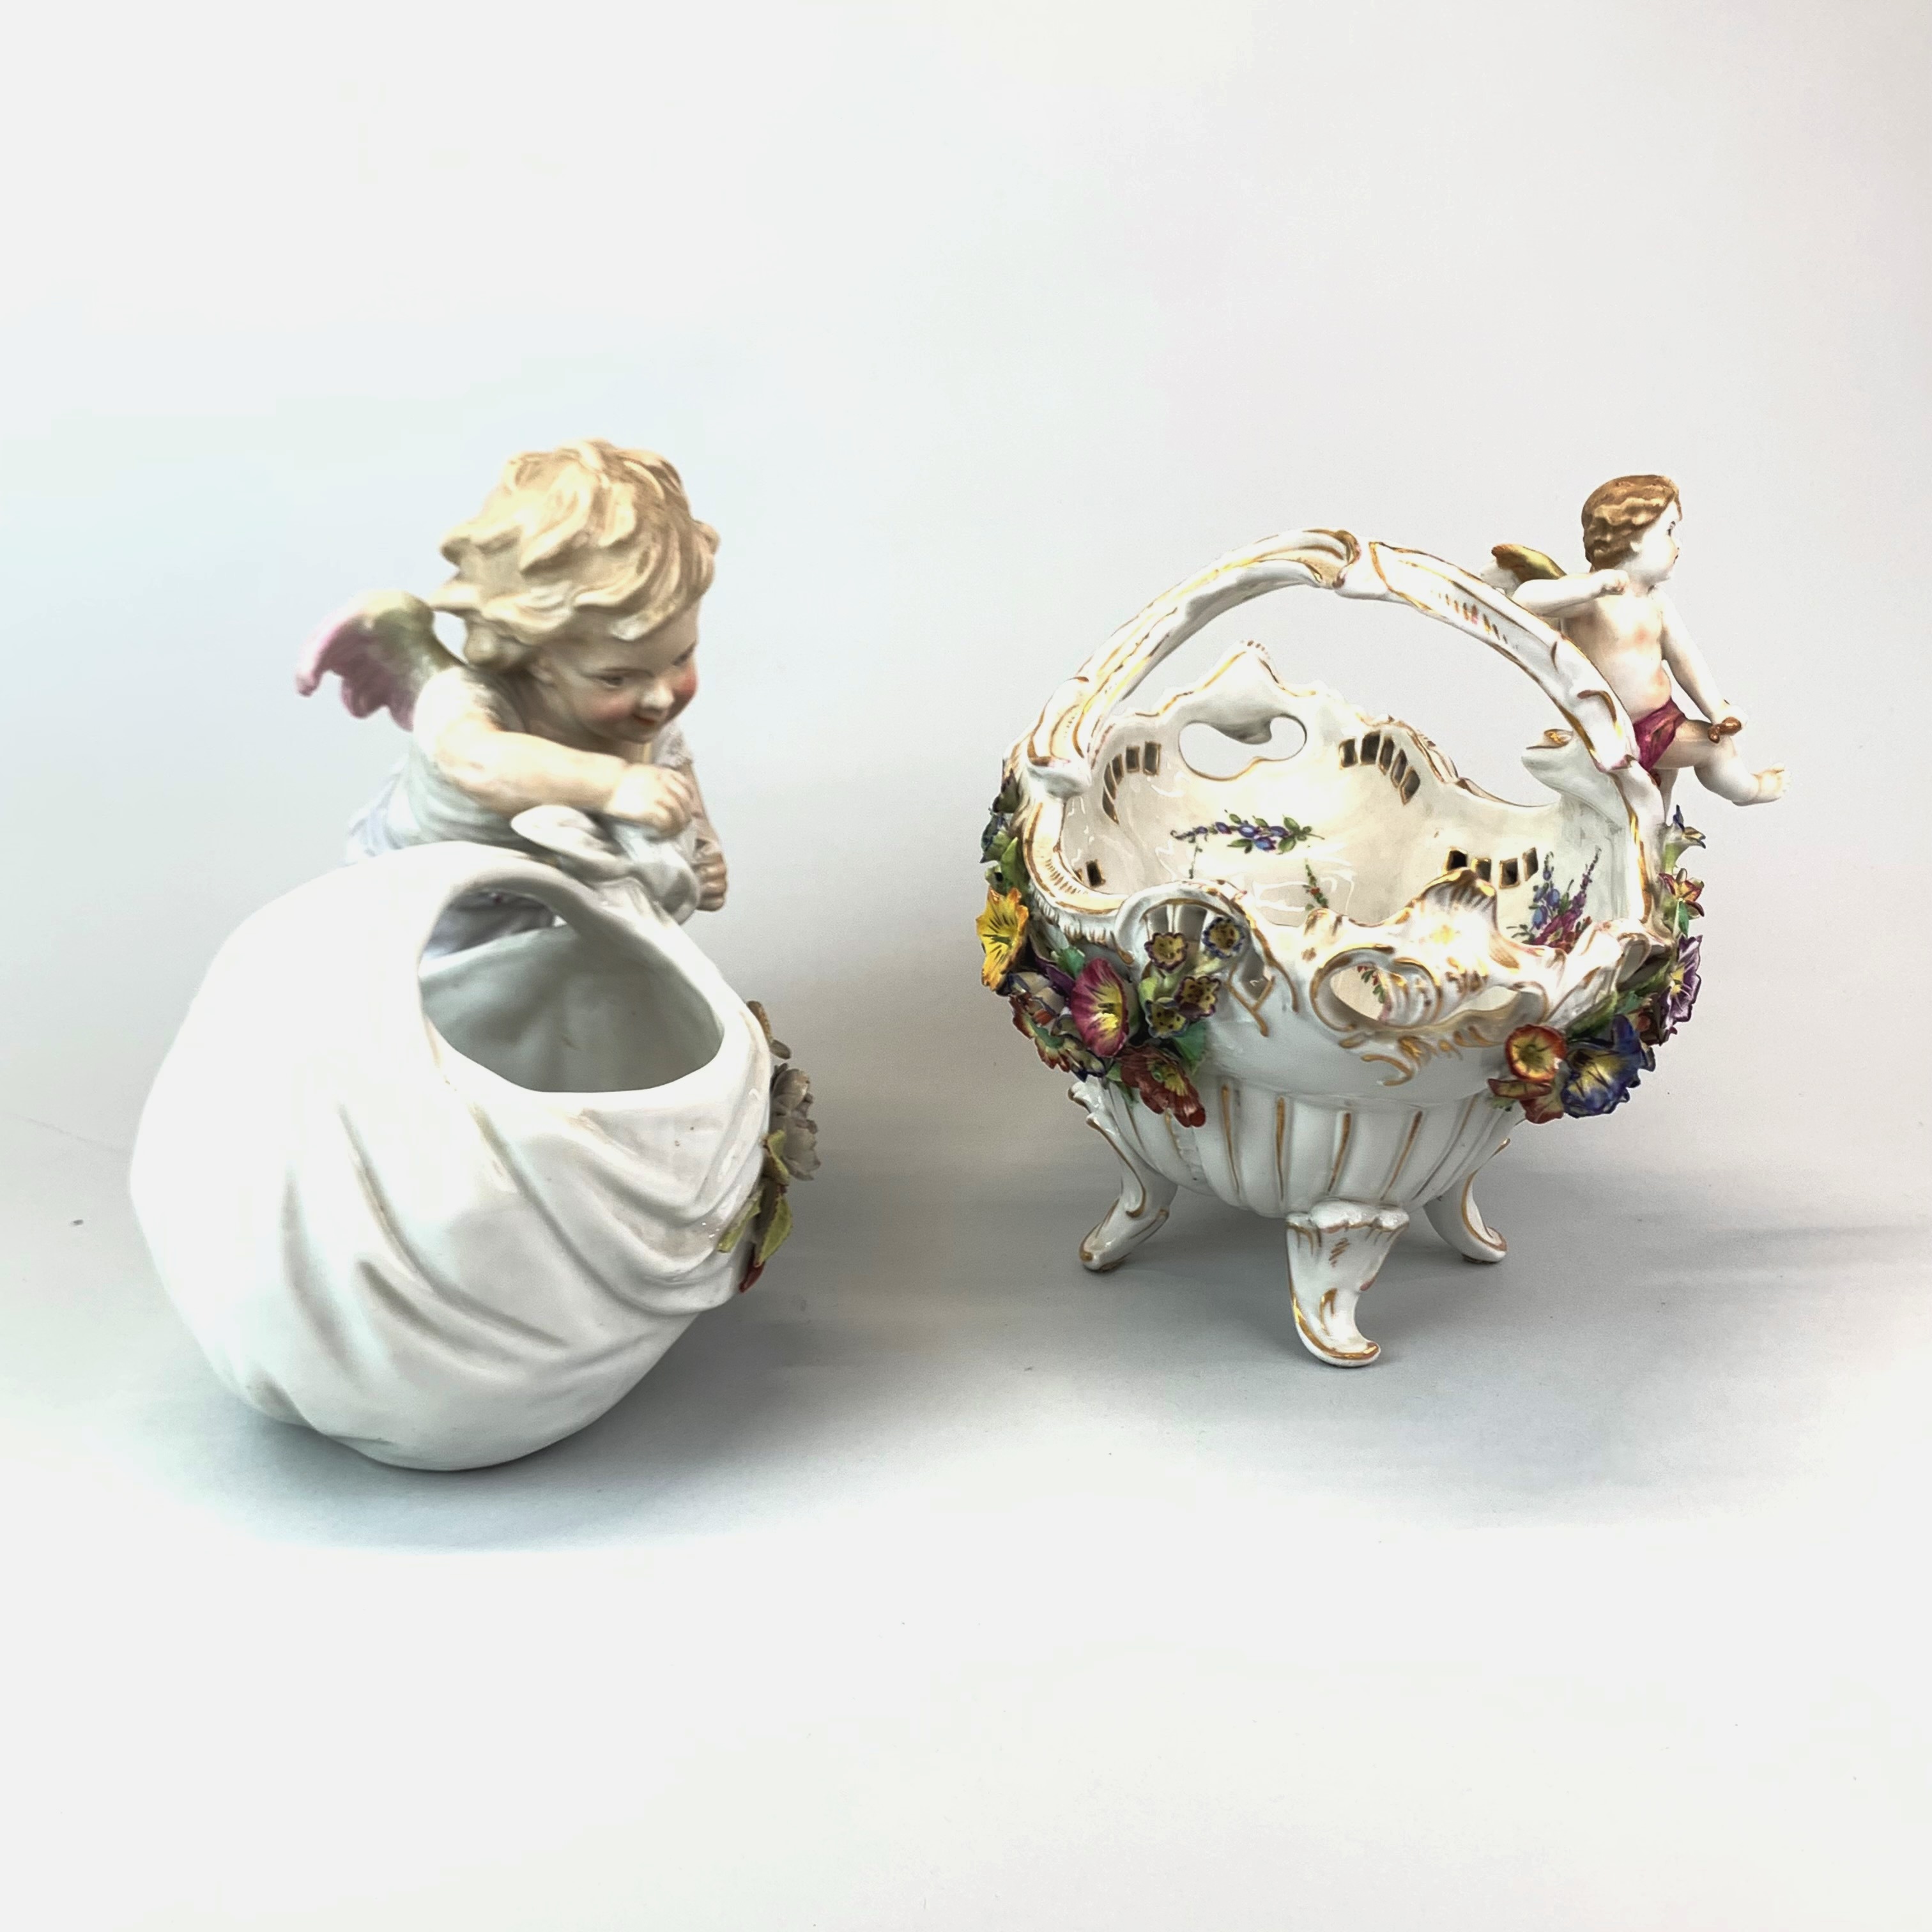 A 19th century German porcelain figure of a cherub with a basket, H. 21cm. together with a further - Image 2 of 3